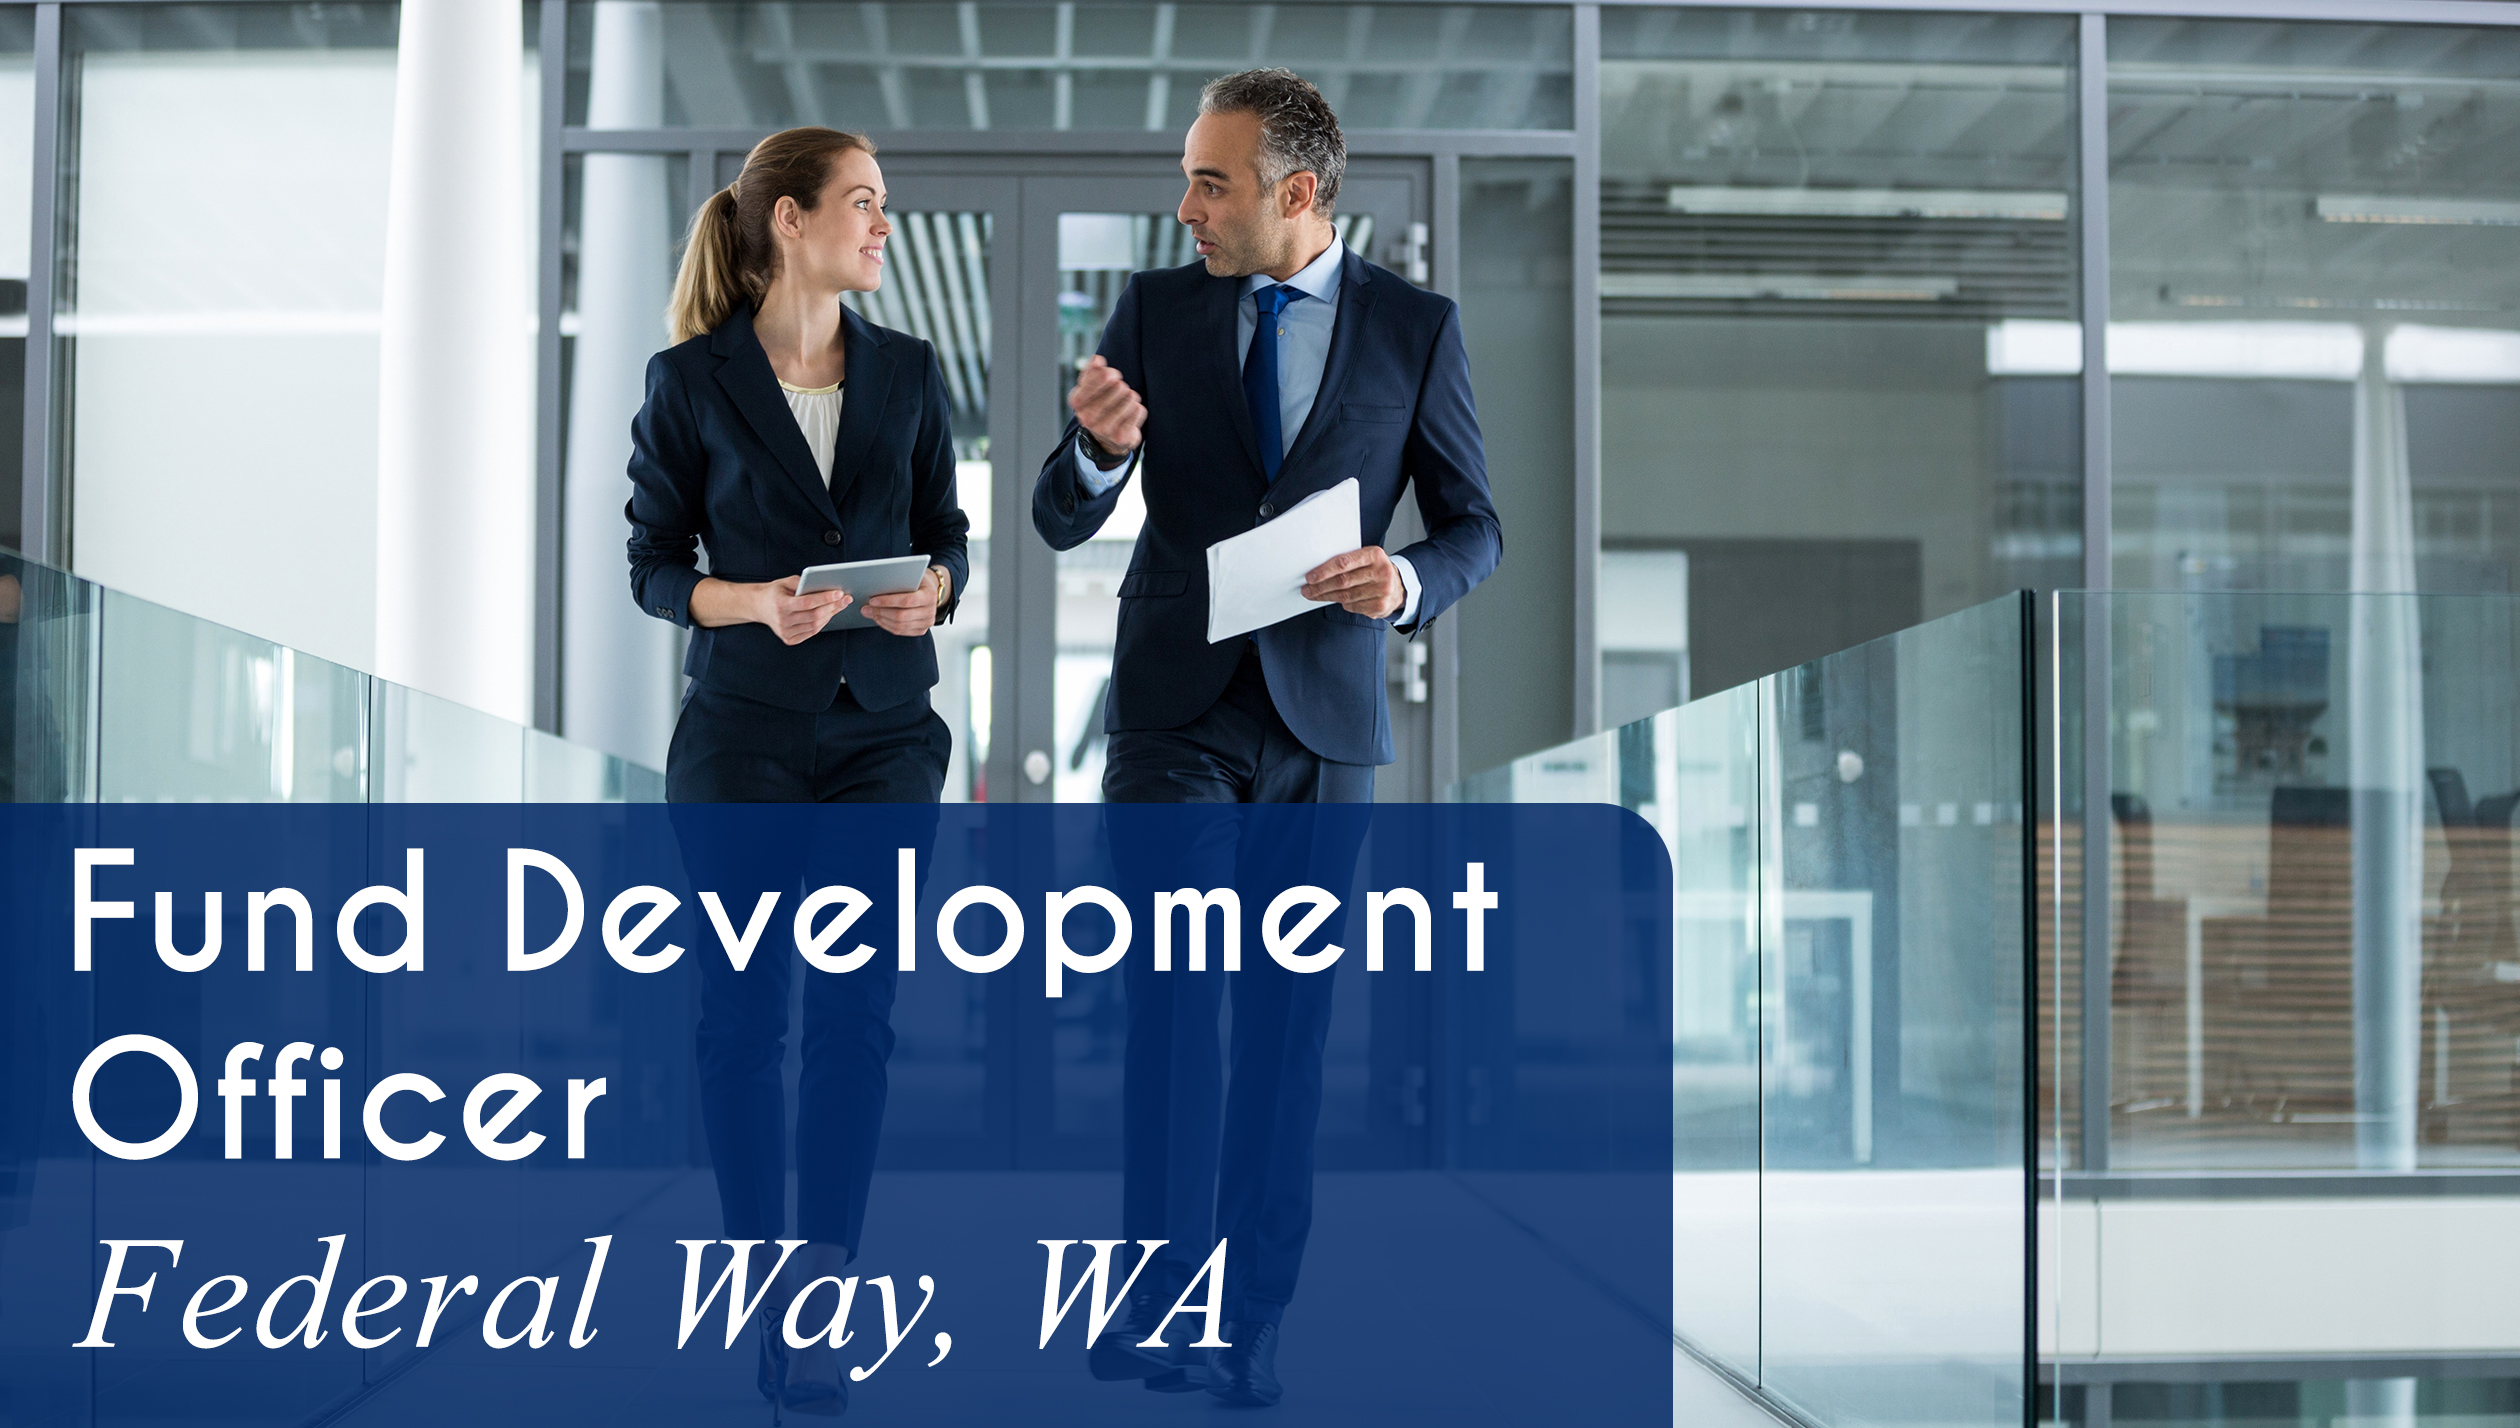 Now Hiring a Fund Development Officer in Federal Way, WA